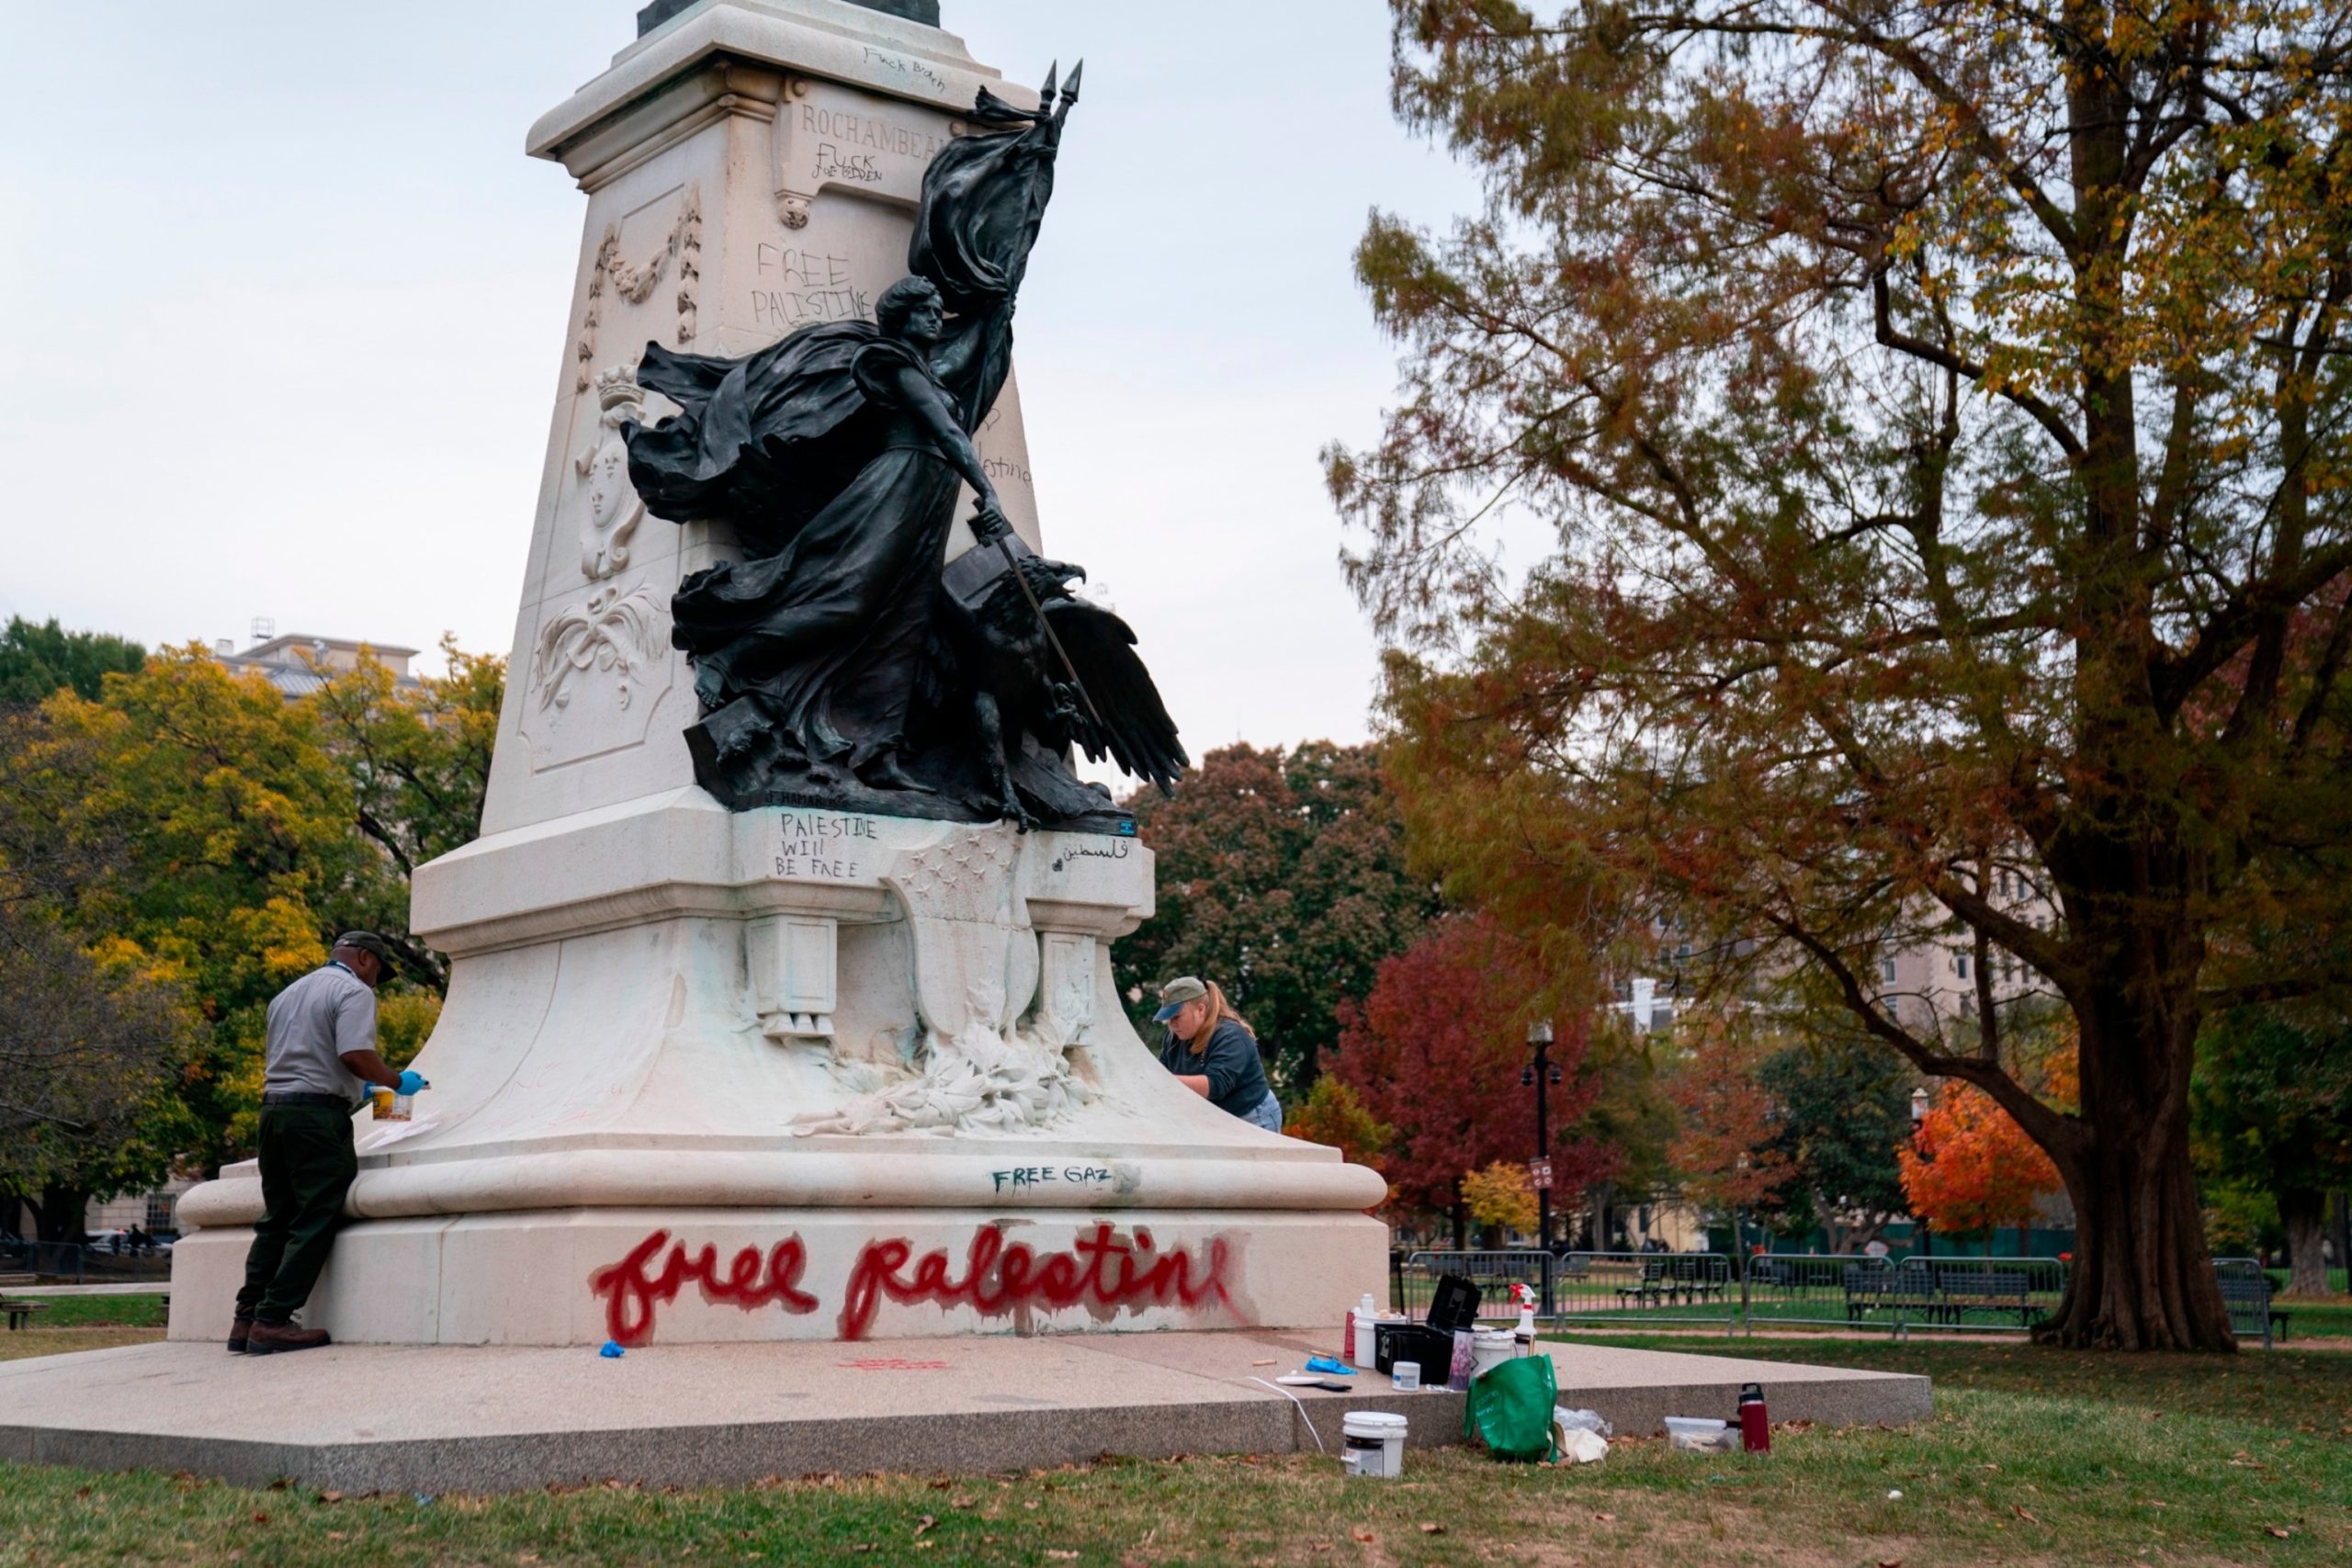 Temporary Closure of Lincoln Memorial Due to Vandalism with 'Free Gaza' Graffiti